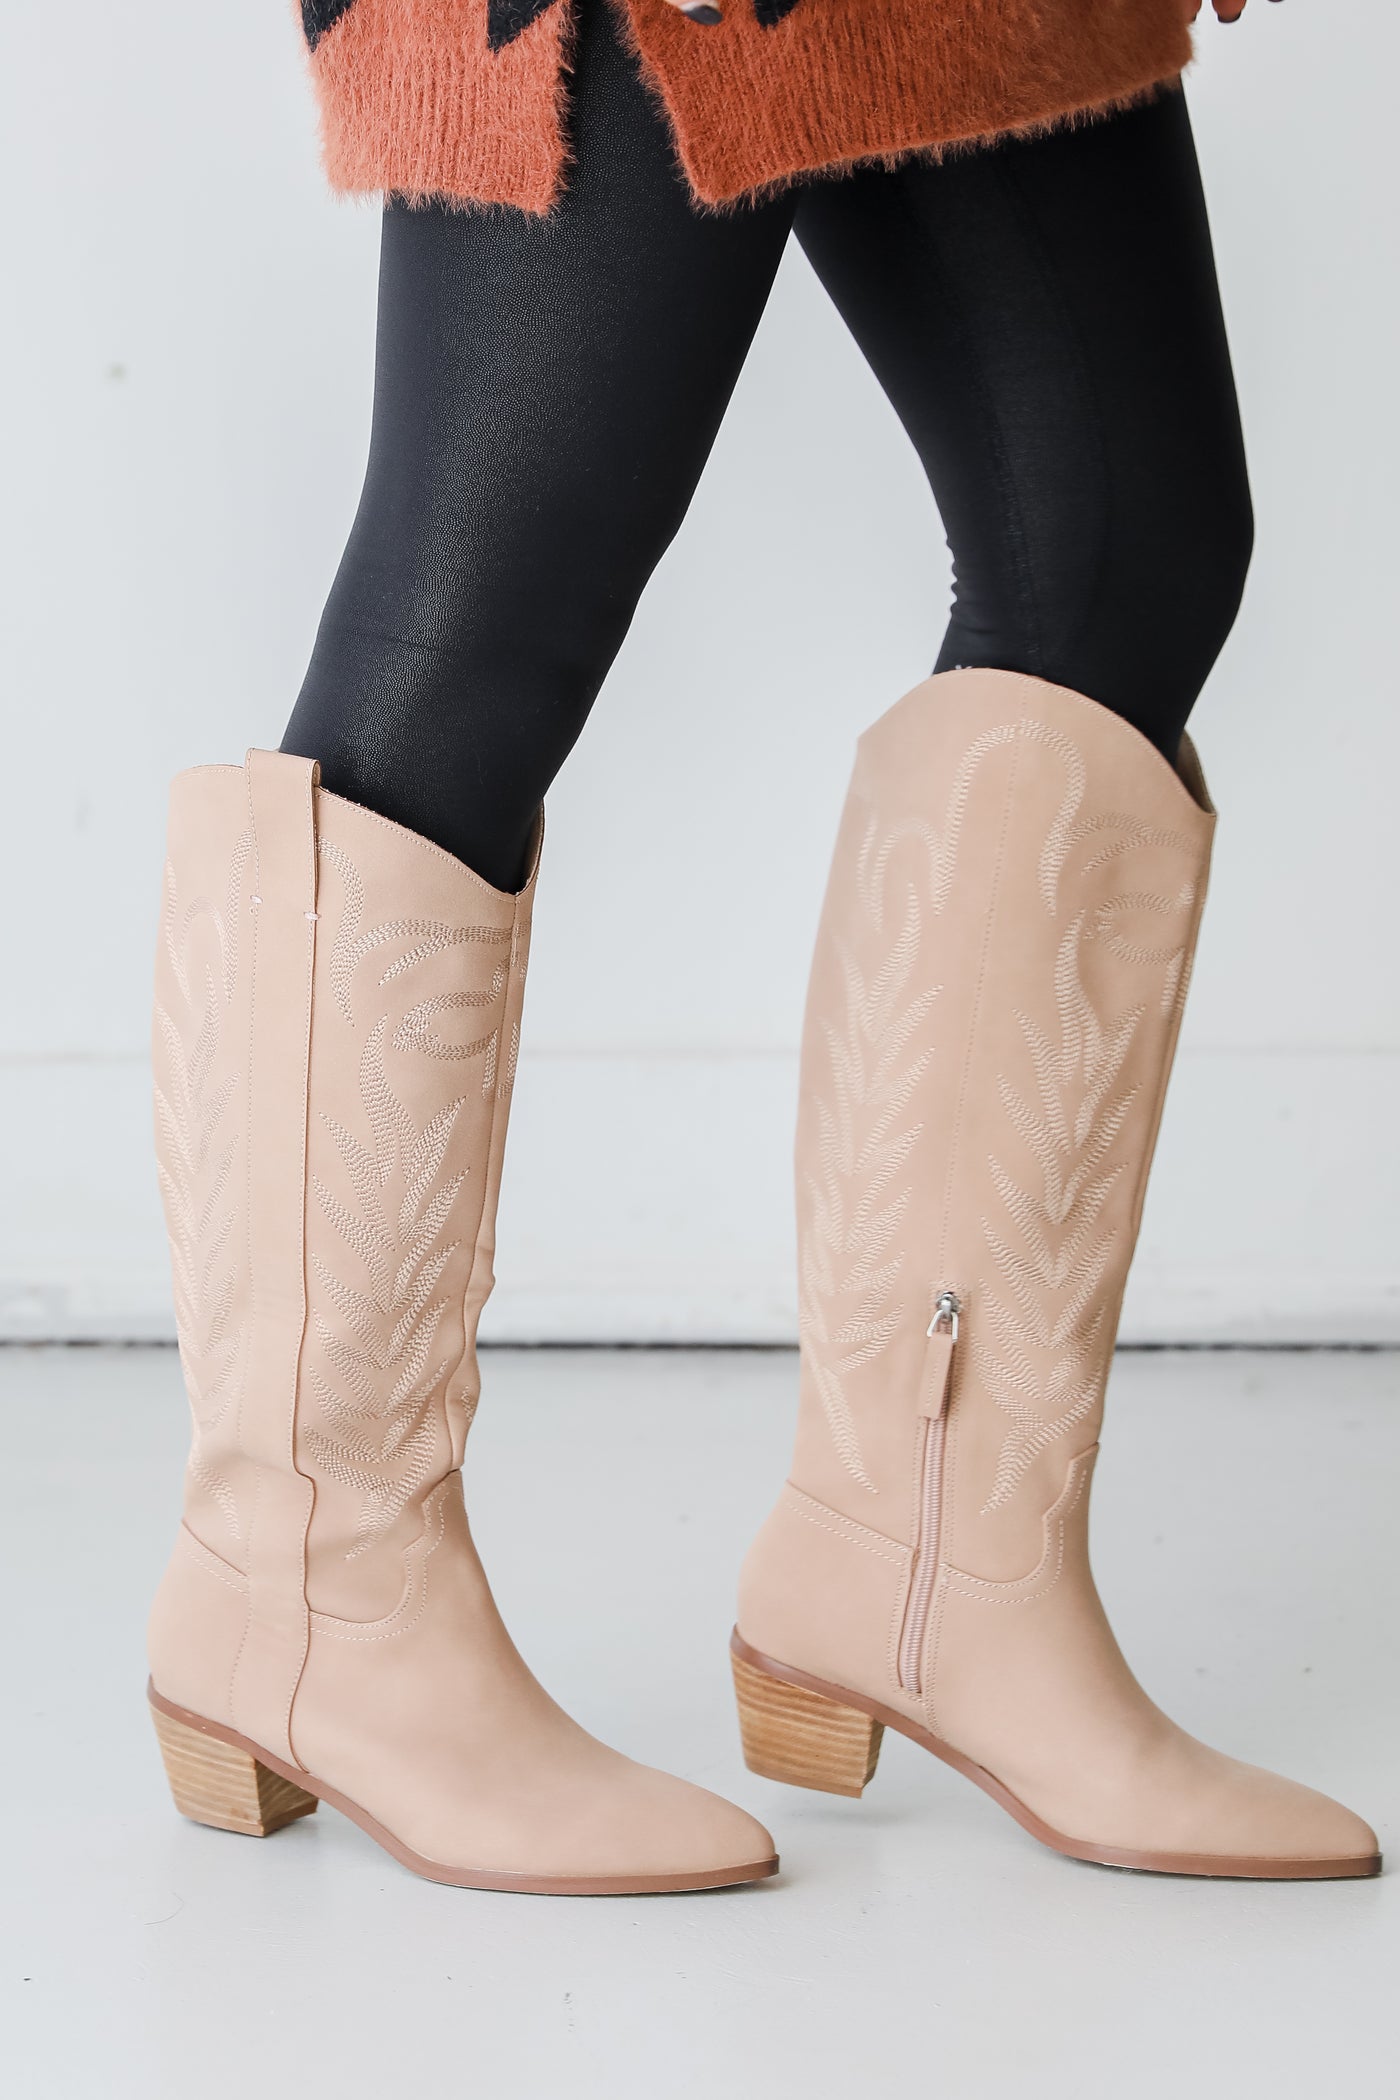 nude Western Knee High Boots side view